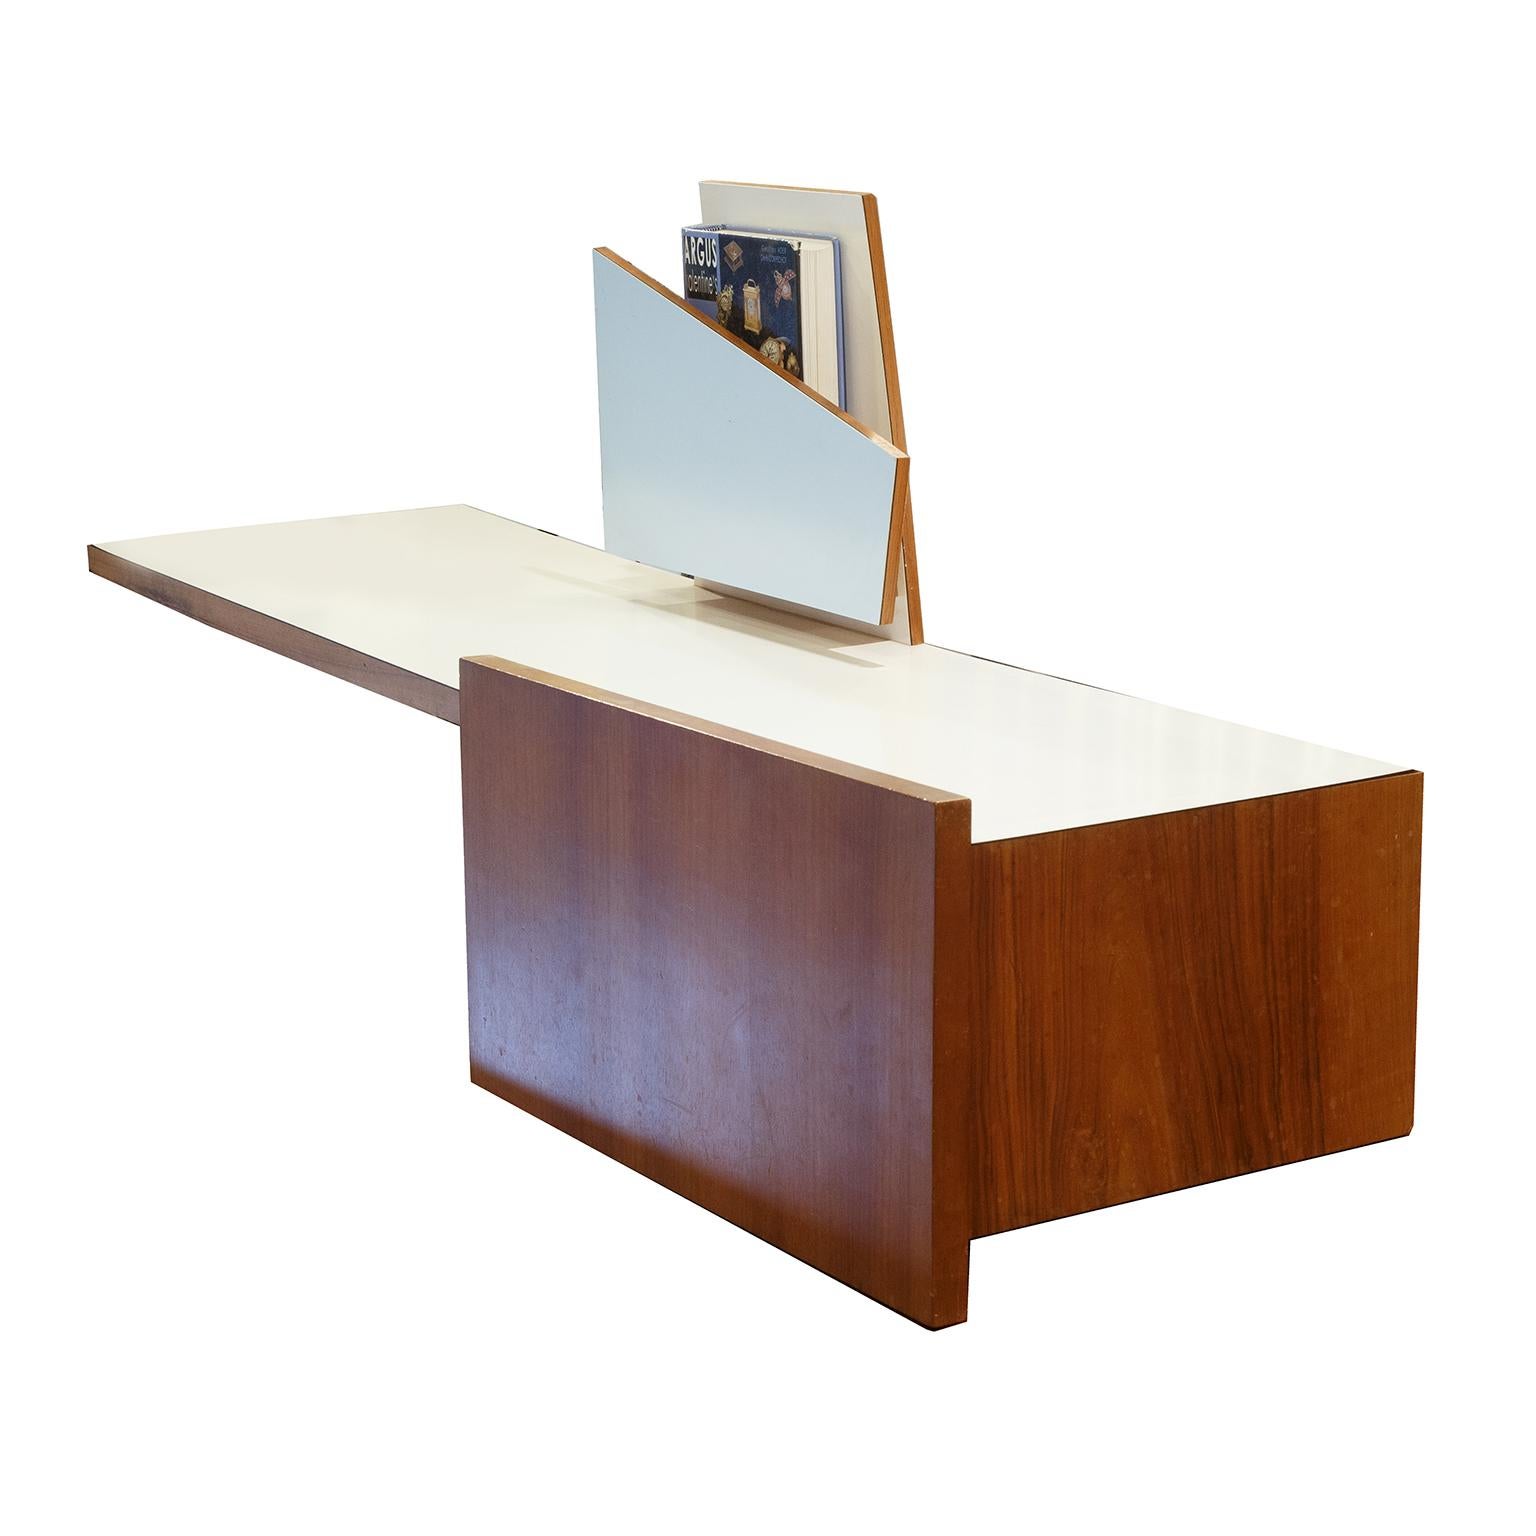 Console suspended on the wall in the style of Gio Ponti Italy Mid-Century Modern 1955 in fruit wood and parts in white and light blue laminate. This console with a touch of exclusive design is suitable for use environments. The console has a flap